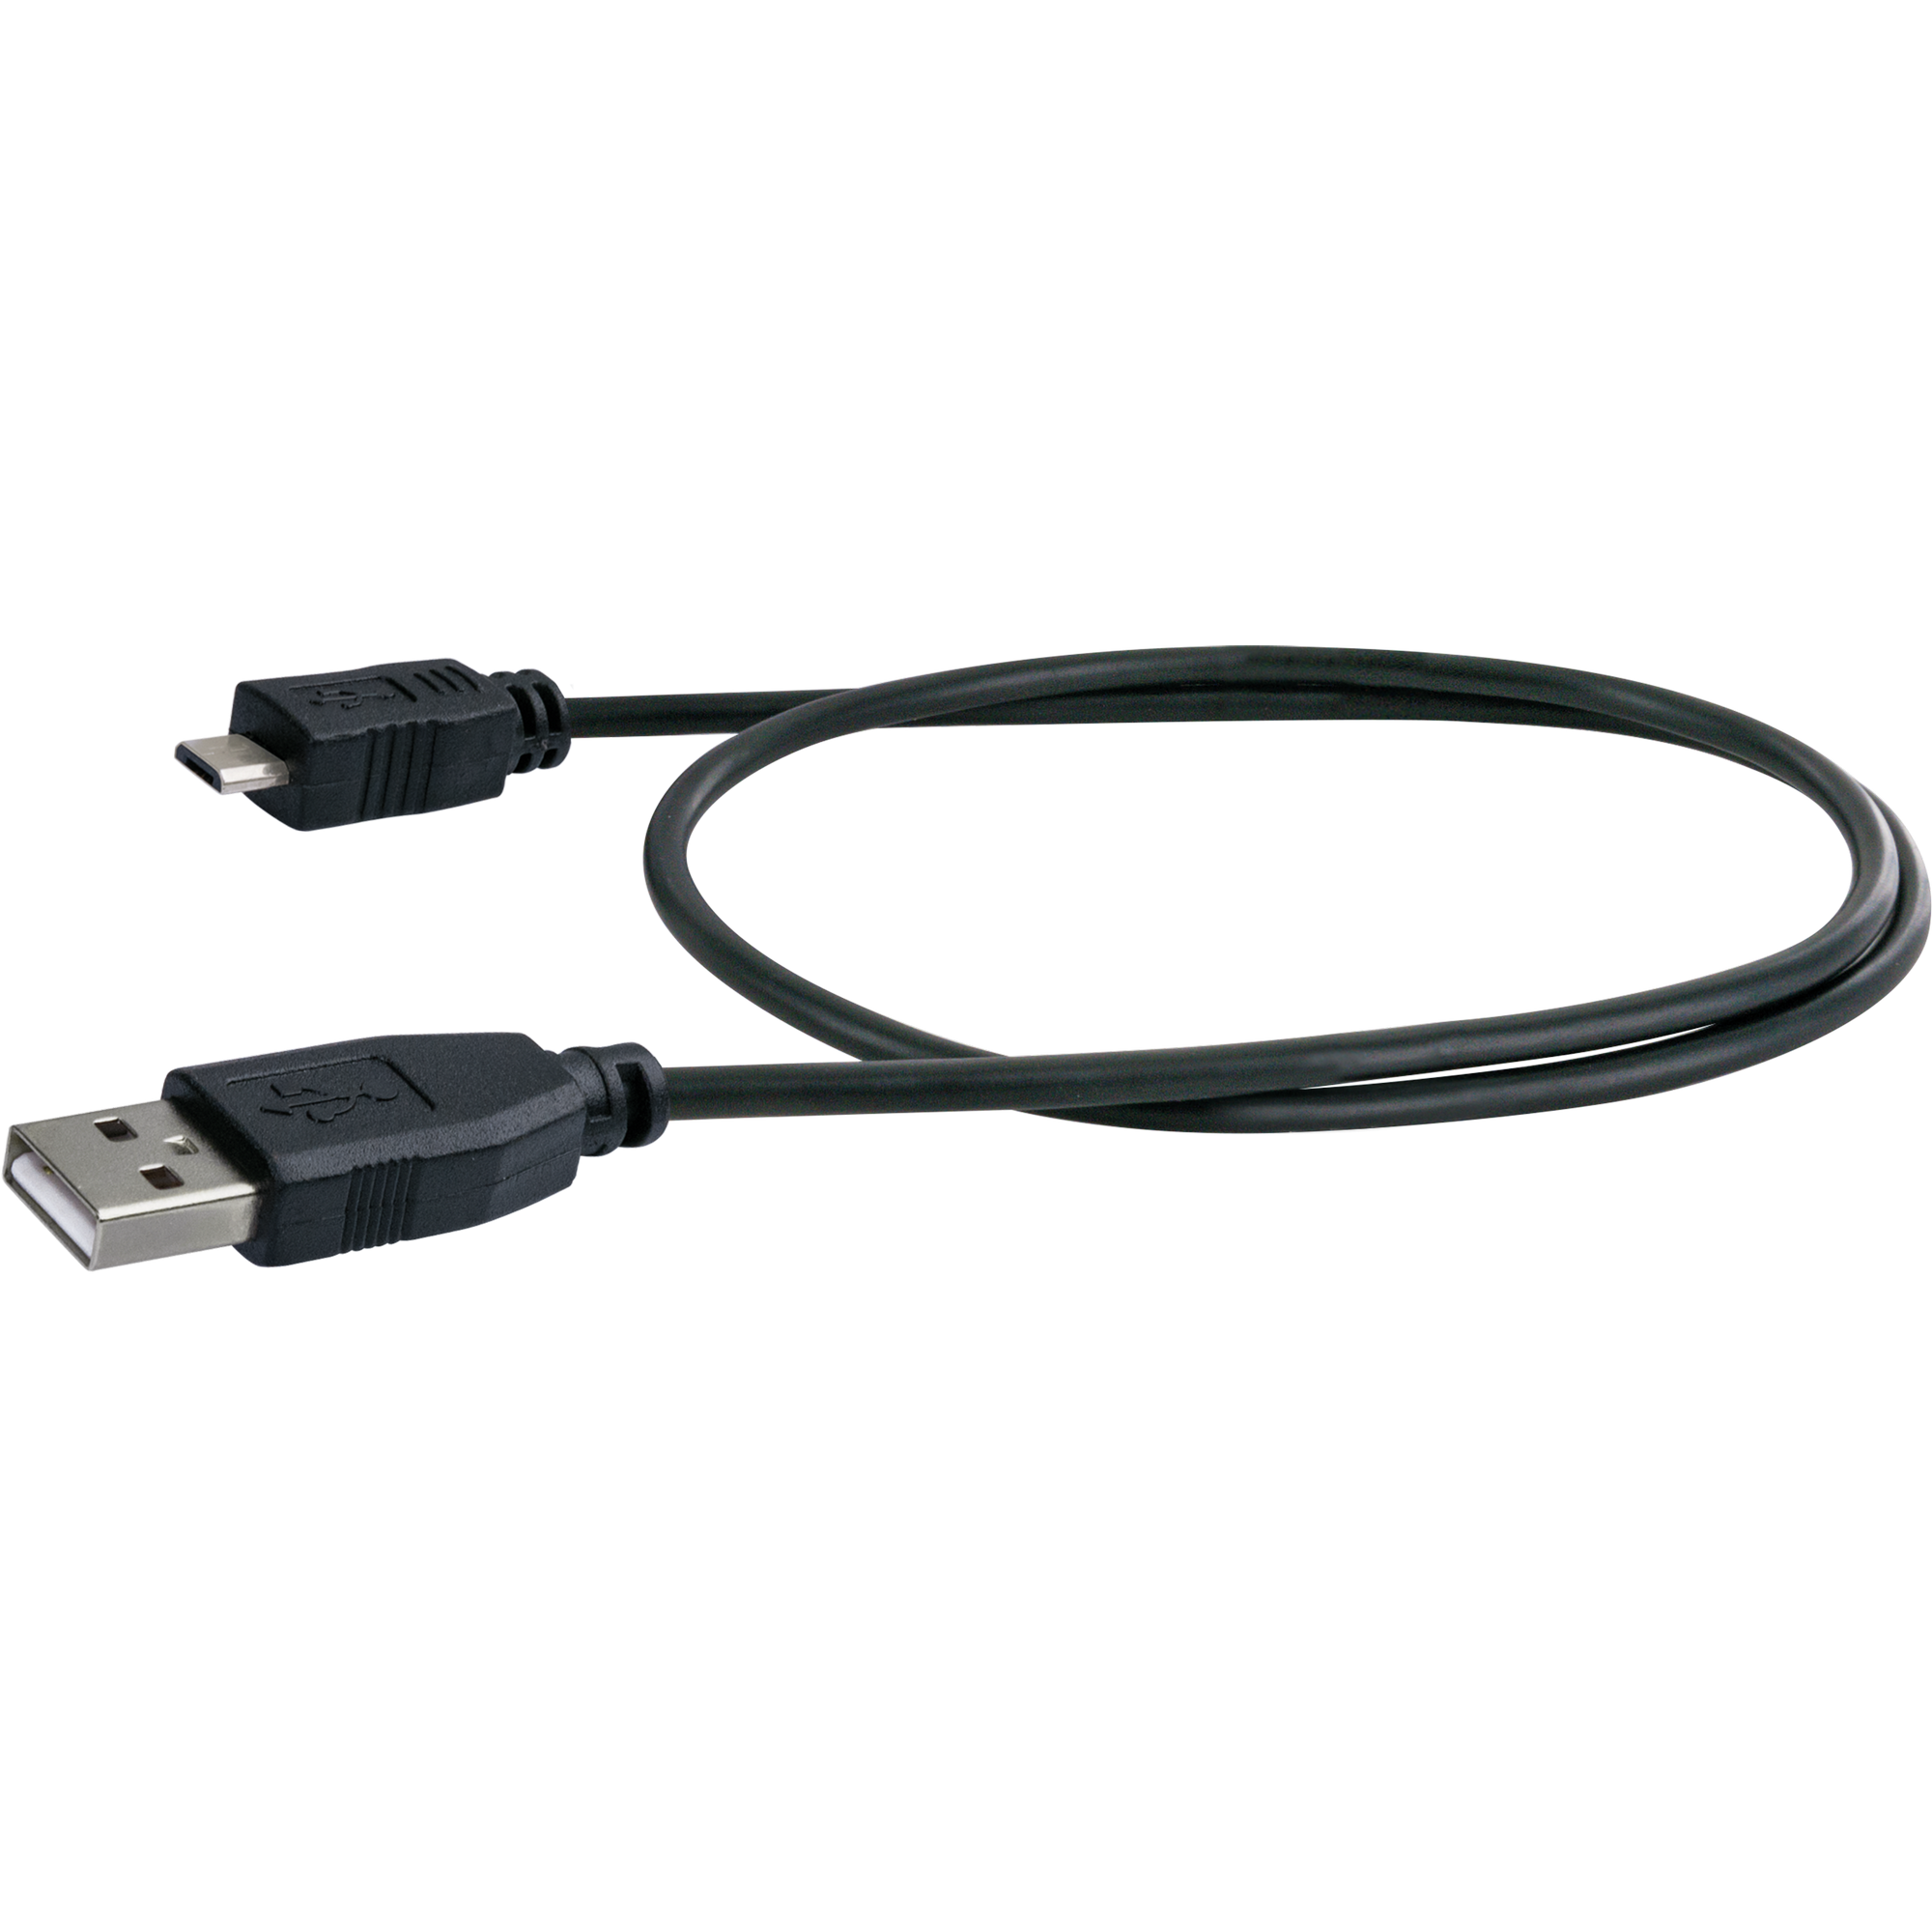 Sync- und Ladekabel Micro USB 2.0 B/USB 2.0 A, 50 cm + product picture